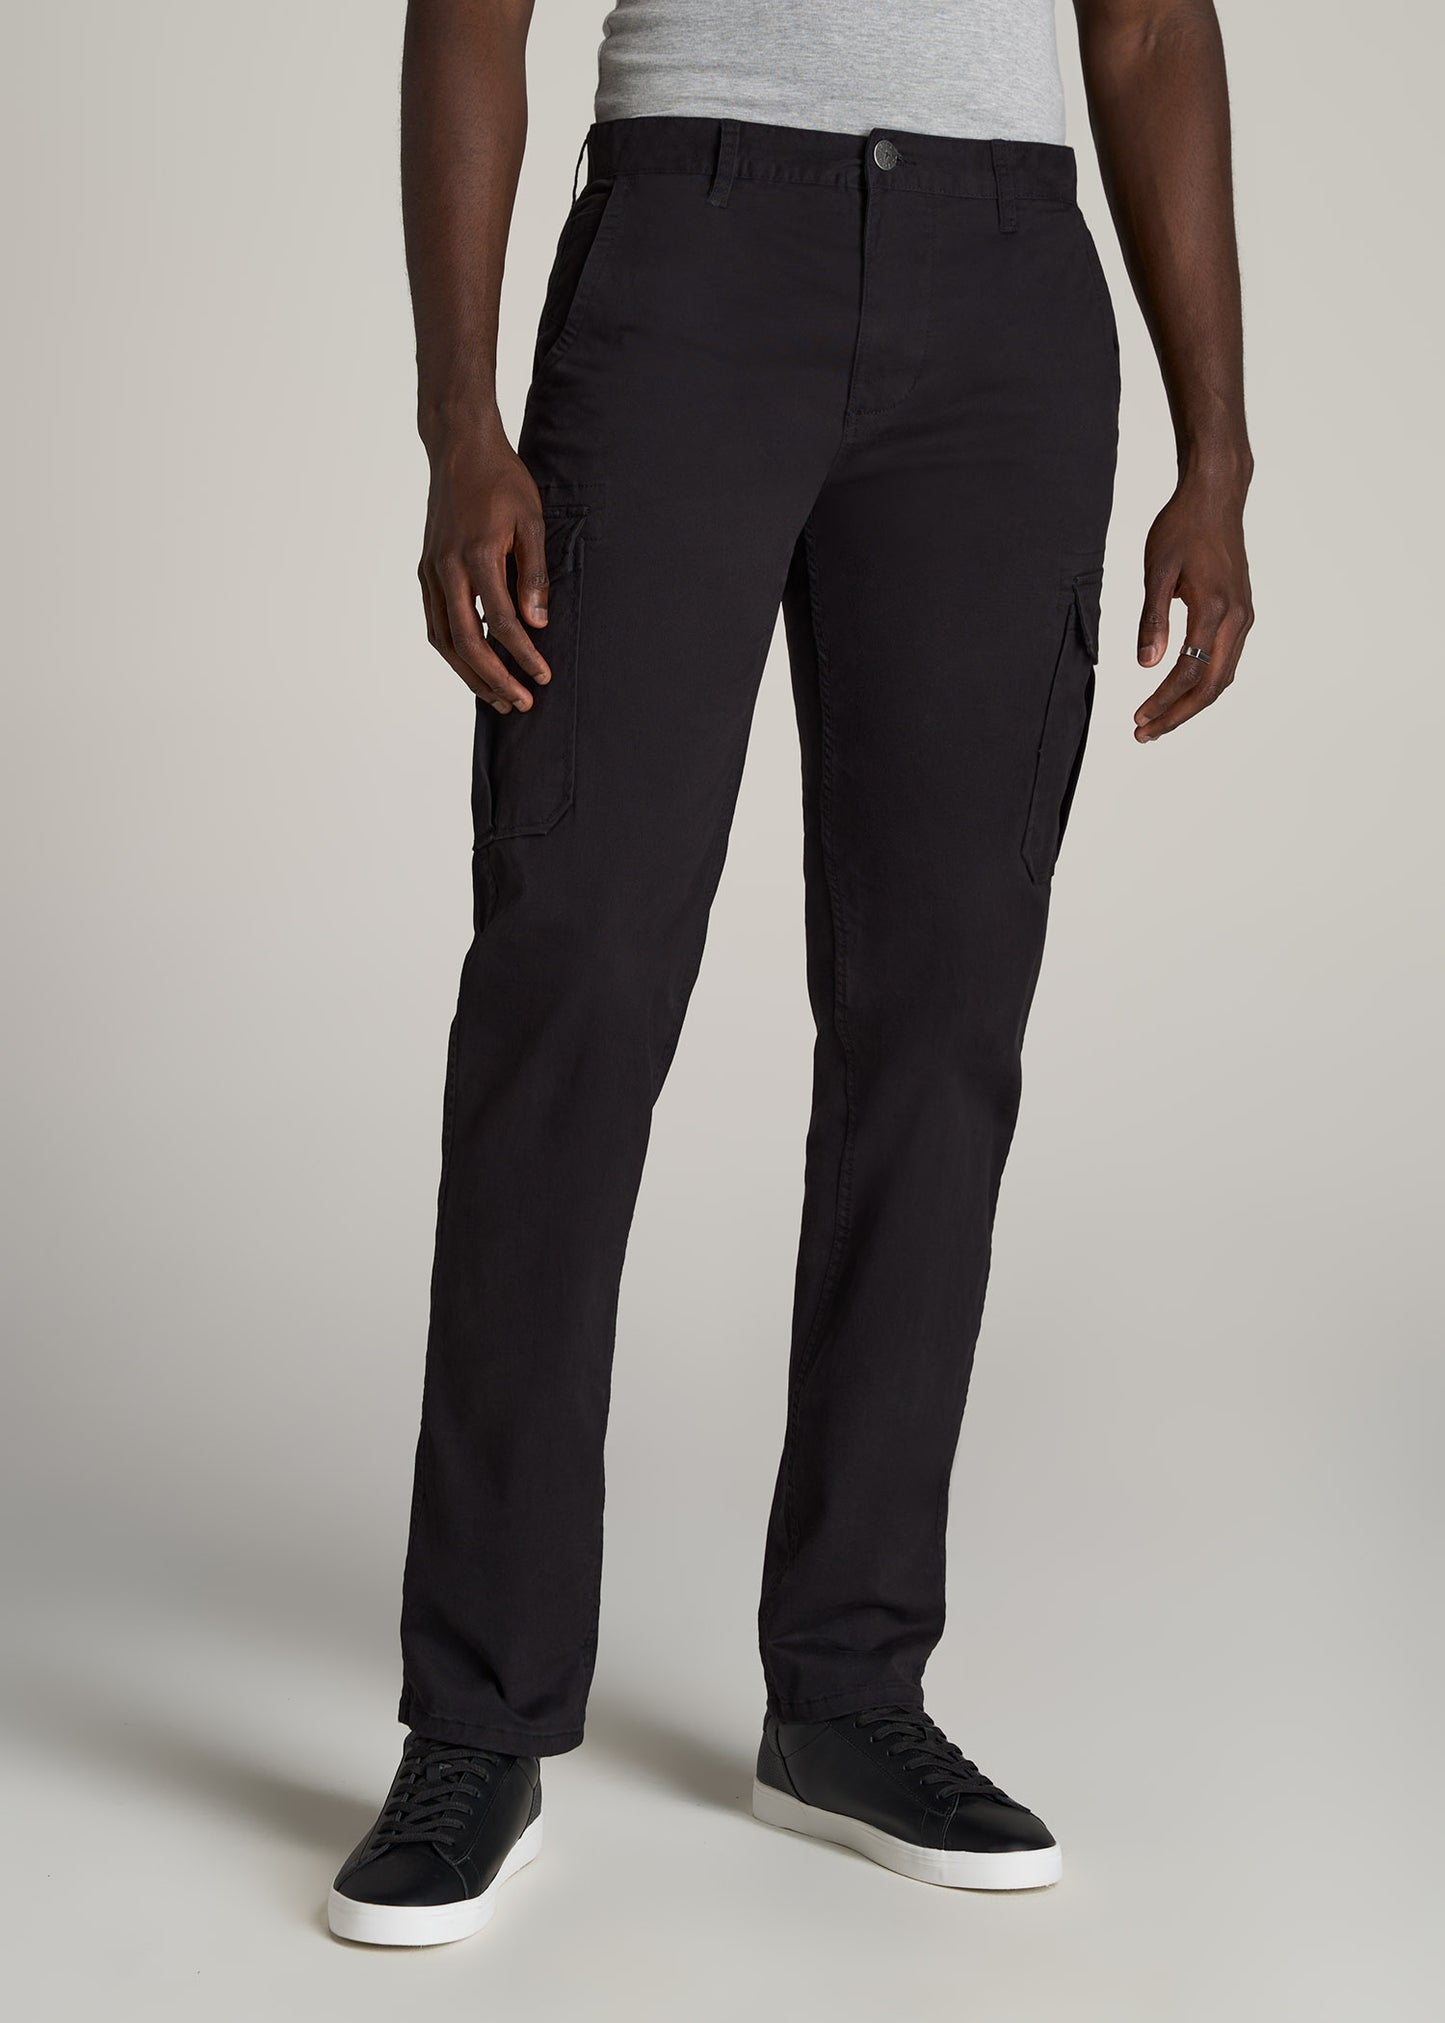       American-Tall-Men-Stretch-Twill-Cargo-Pants-Black-front